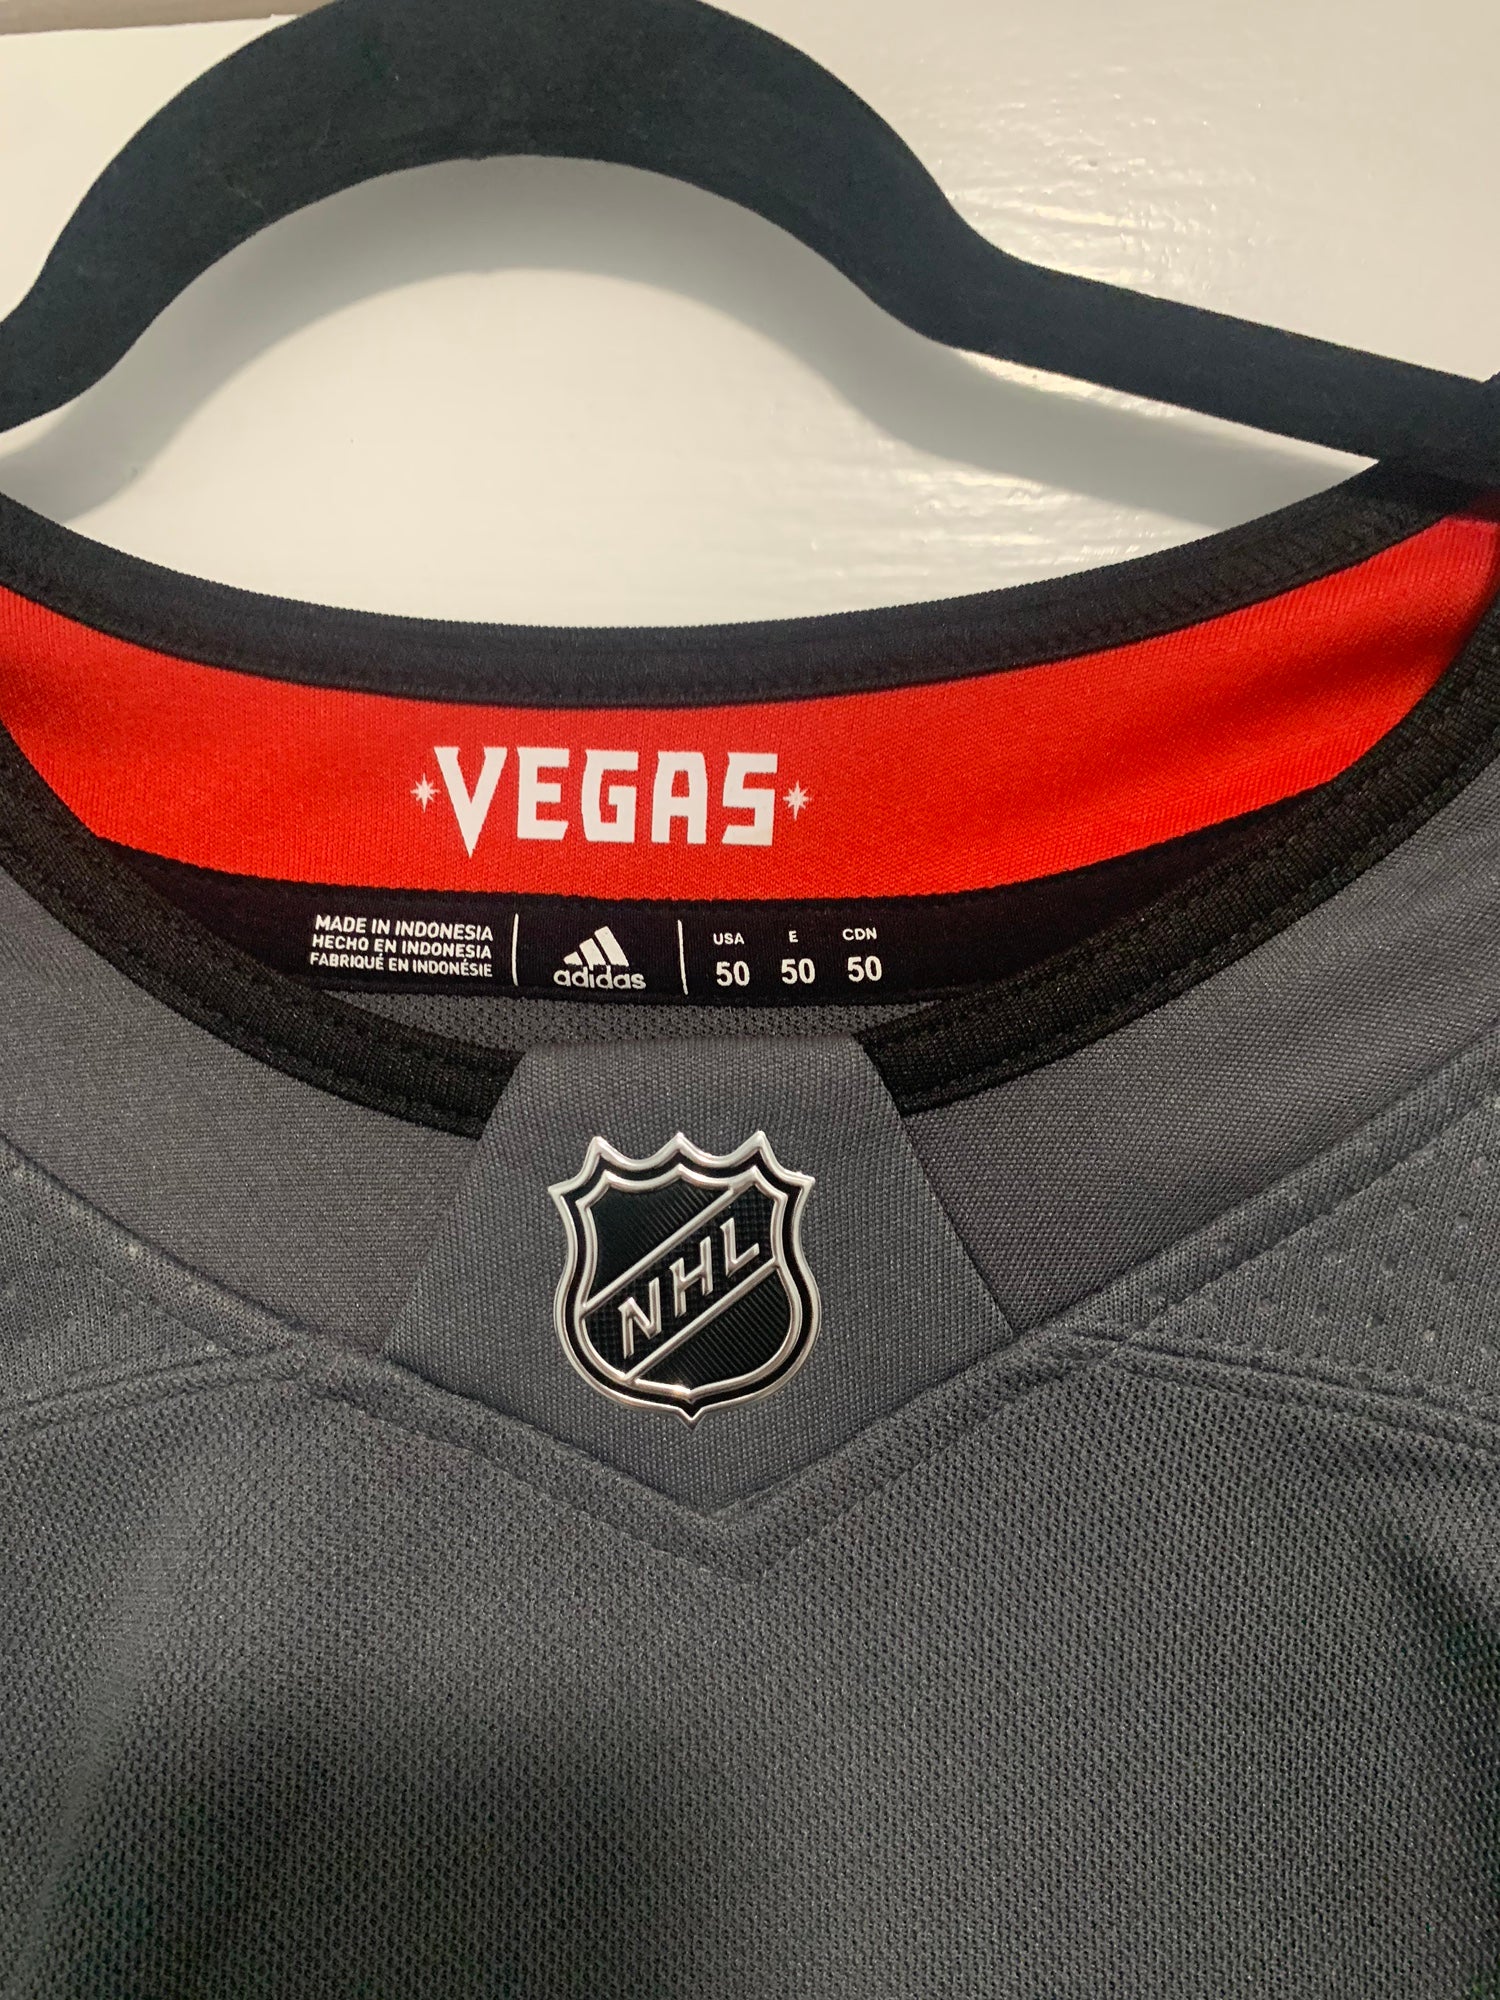 Adidas NHL Vegas Golden Knights (Men's Jersey Size 50) Authentic